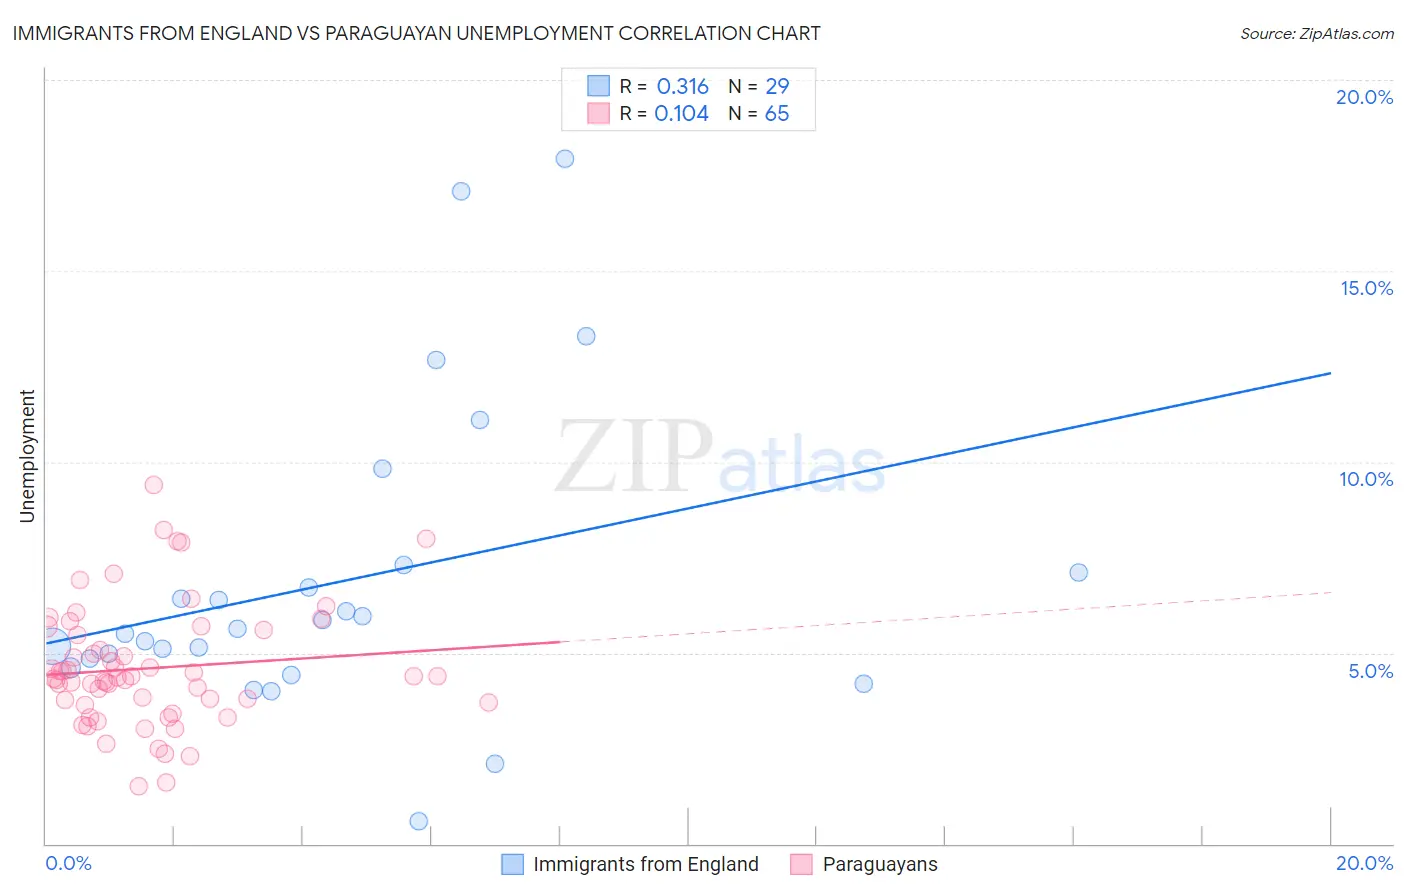 Immigrants from England vs Paraguayan Unemployment